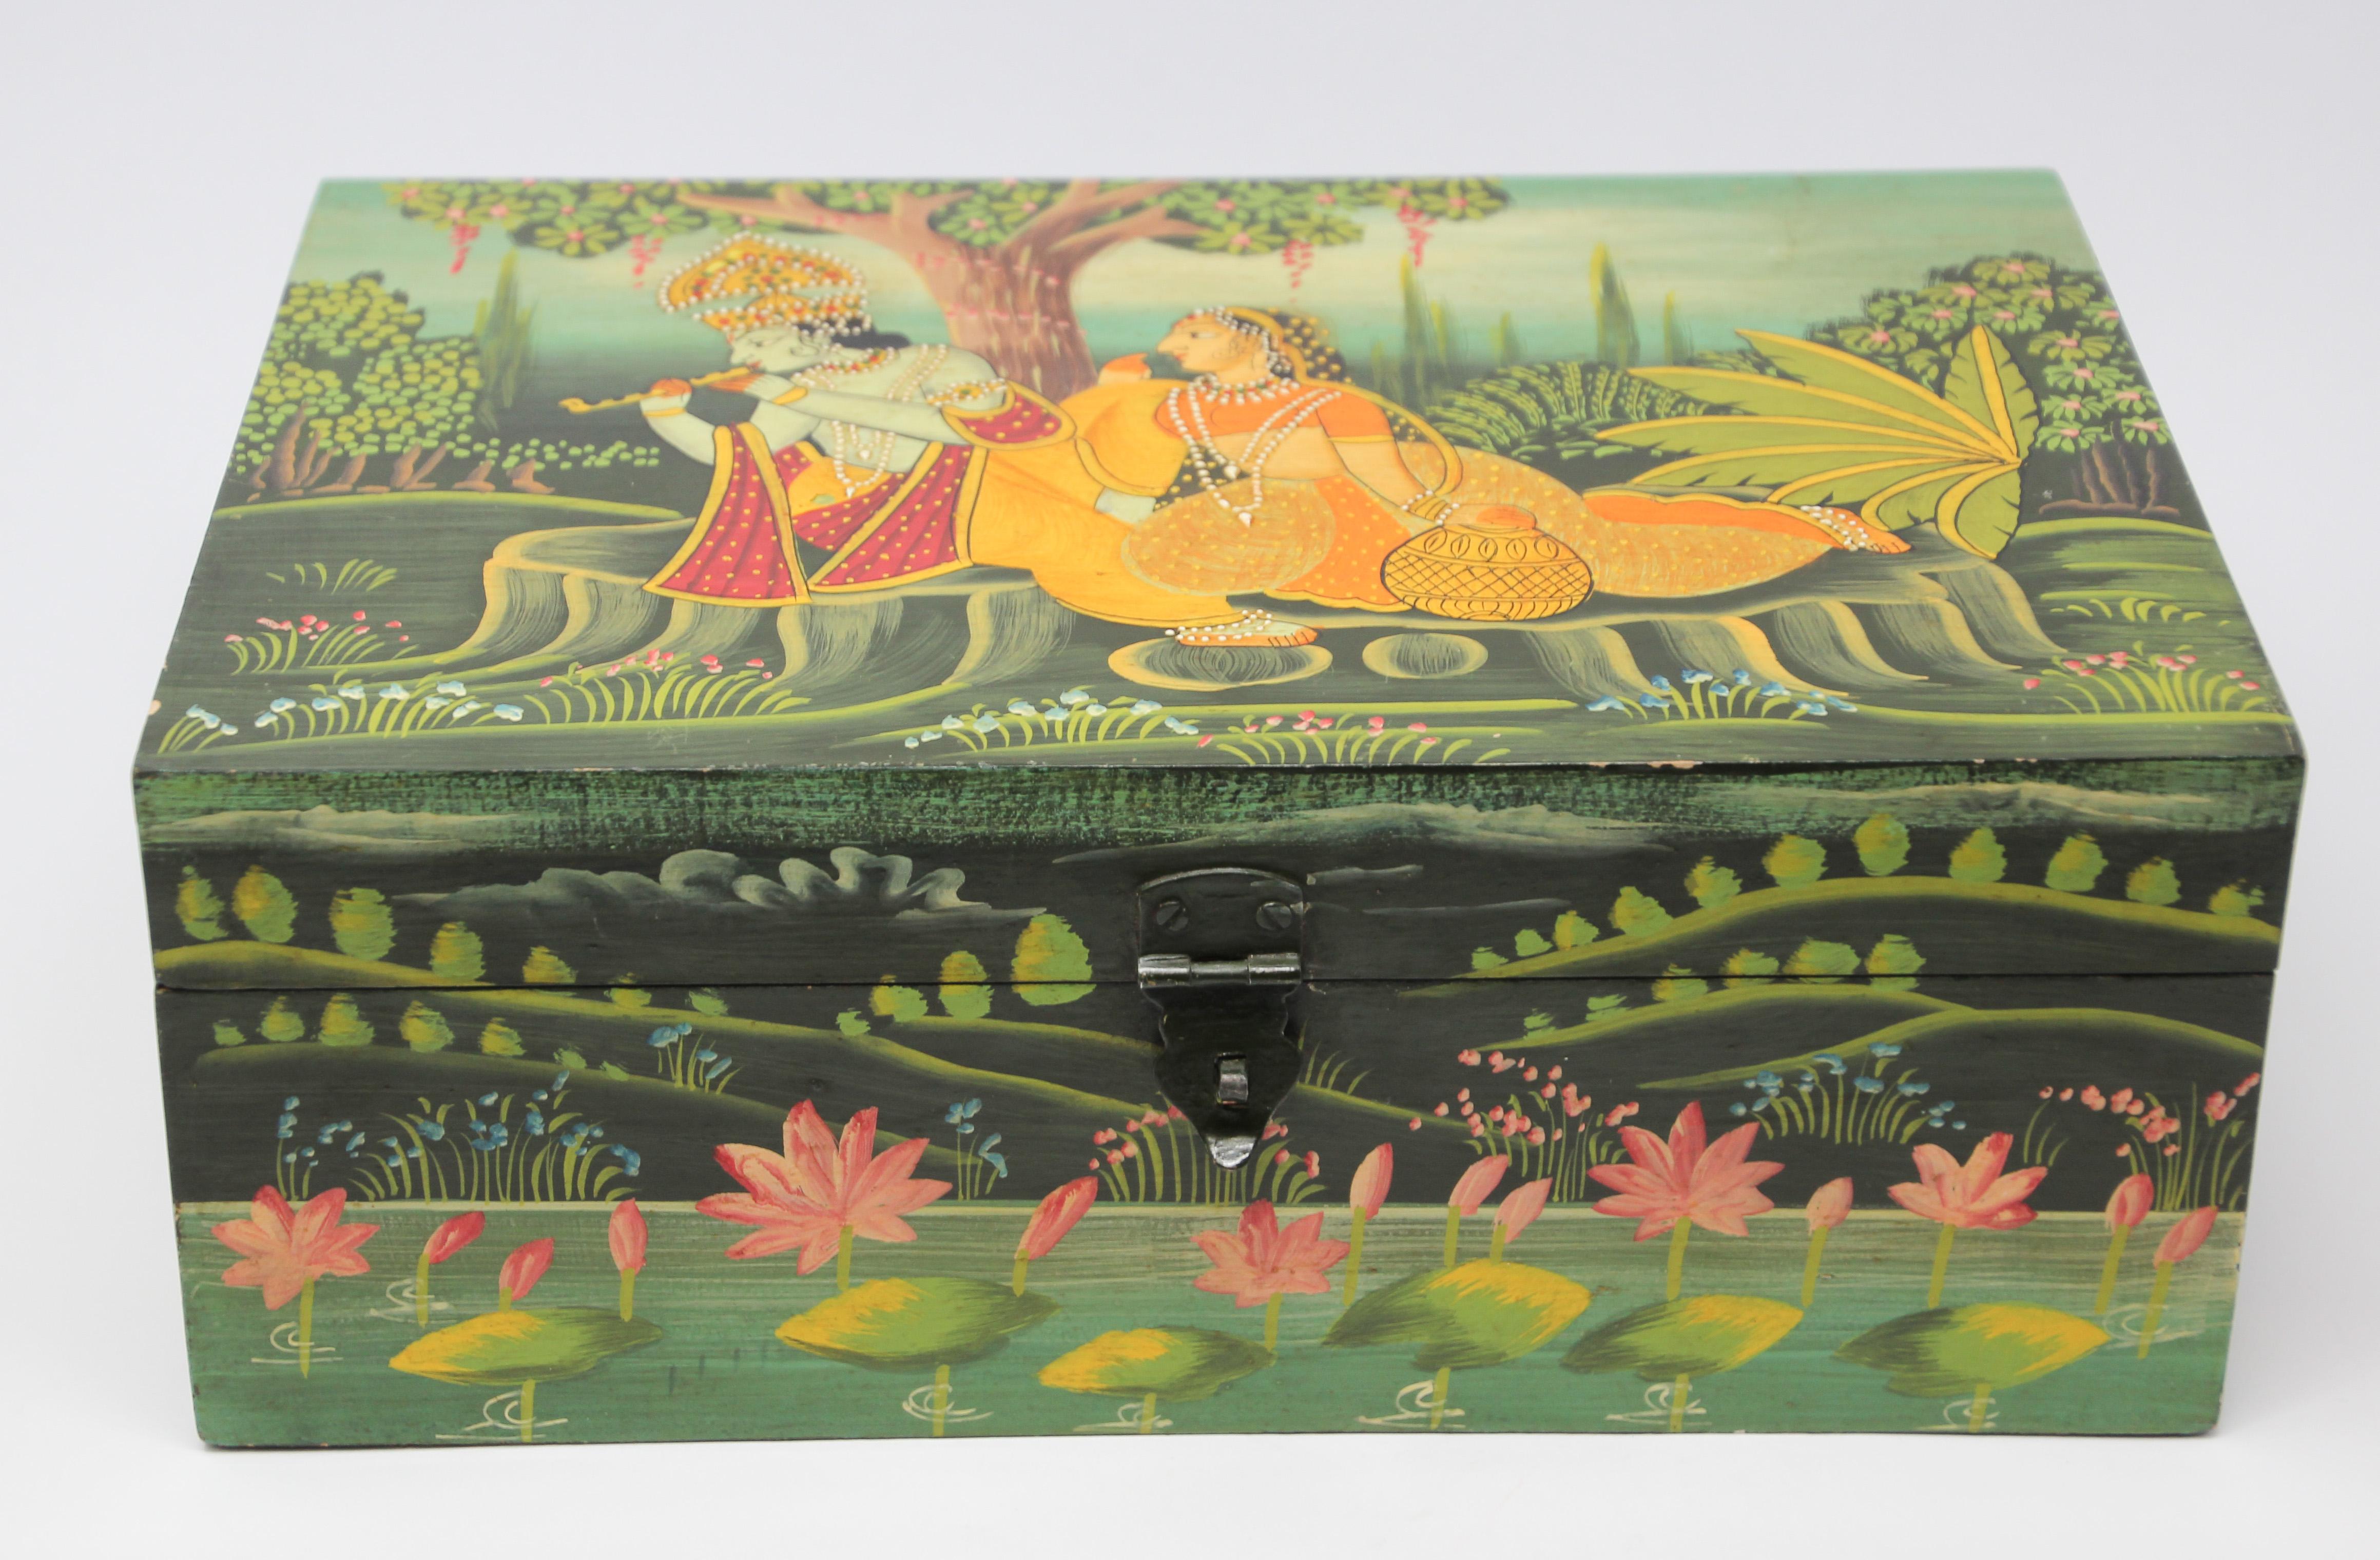 Hand painted wooden box.
Incredibly intricate, highly detailed and colorful handcrafted wooden box with Krishna playing the flute and a female figure.
Colorful painting depicting Krishna with female Gopis, great colors, the composition is enclosed